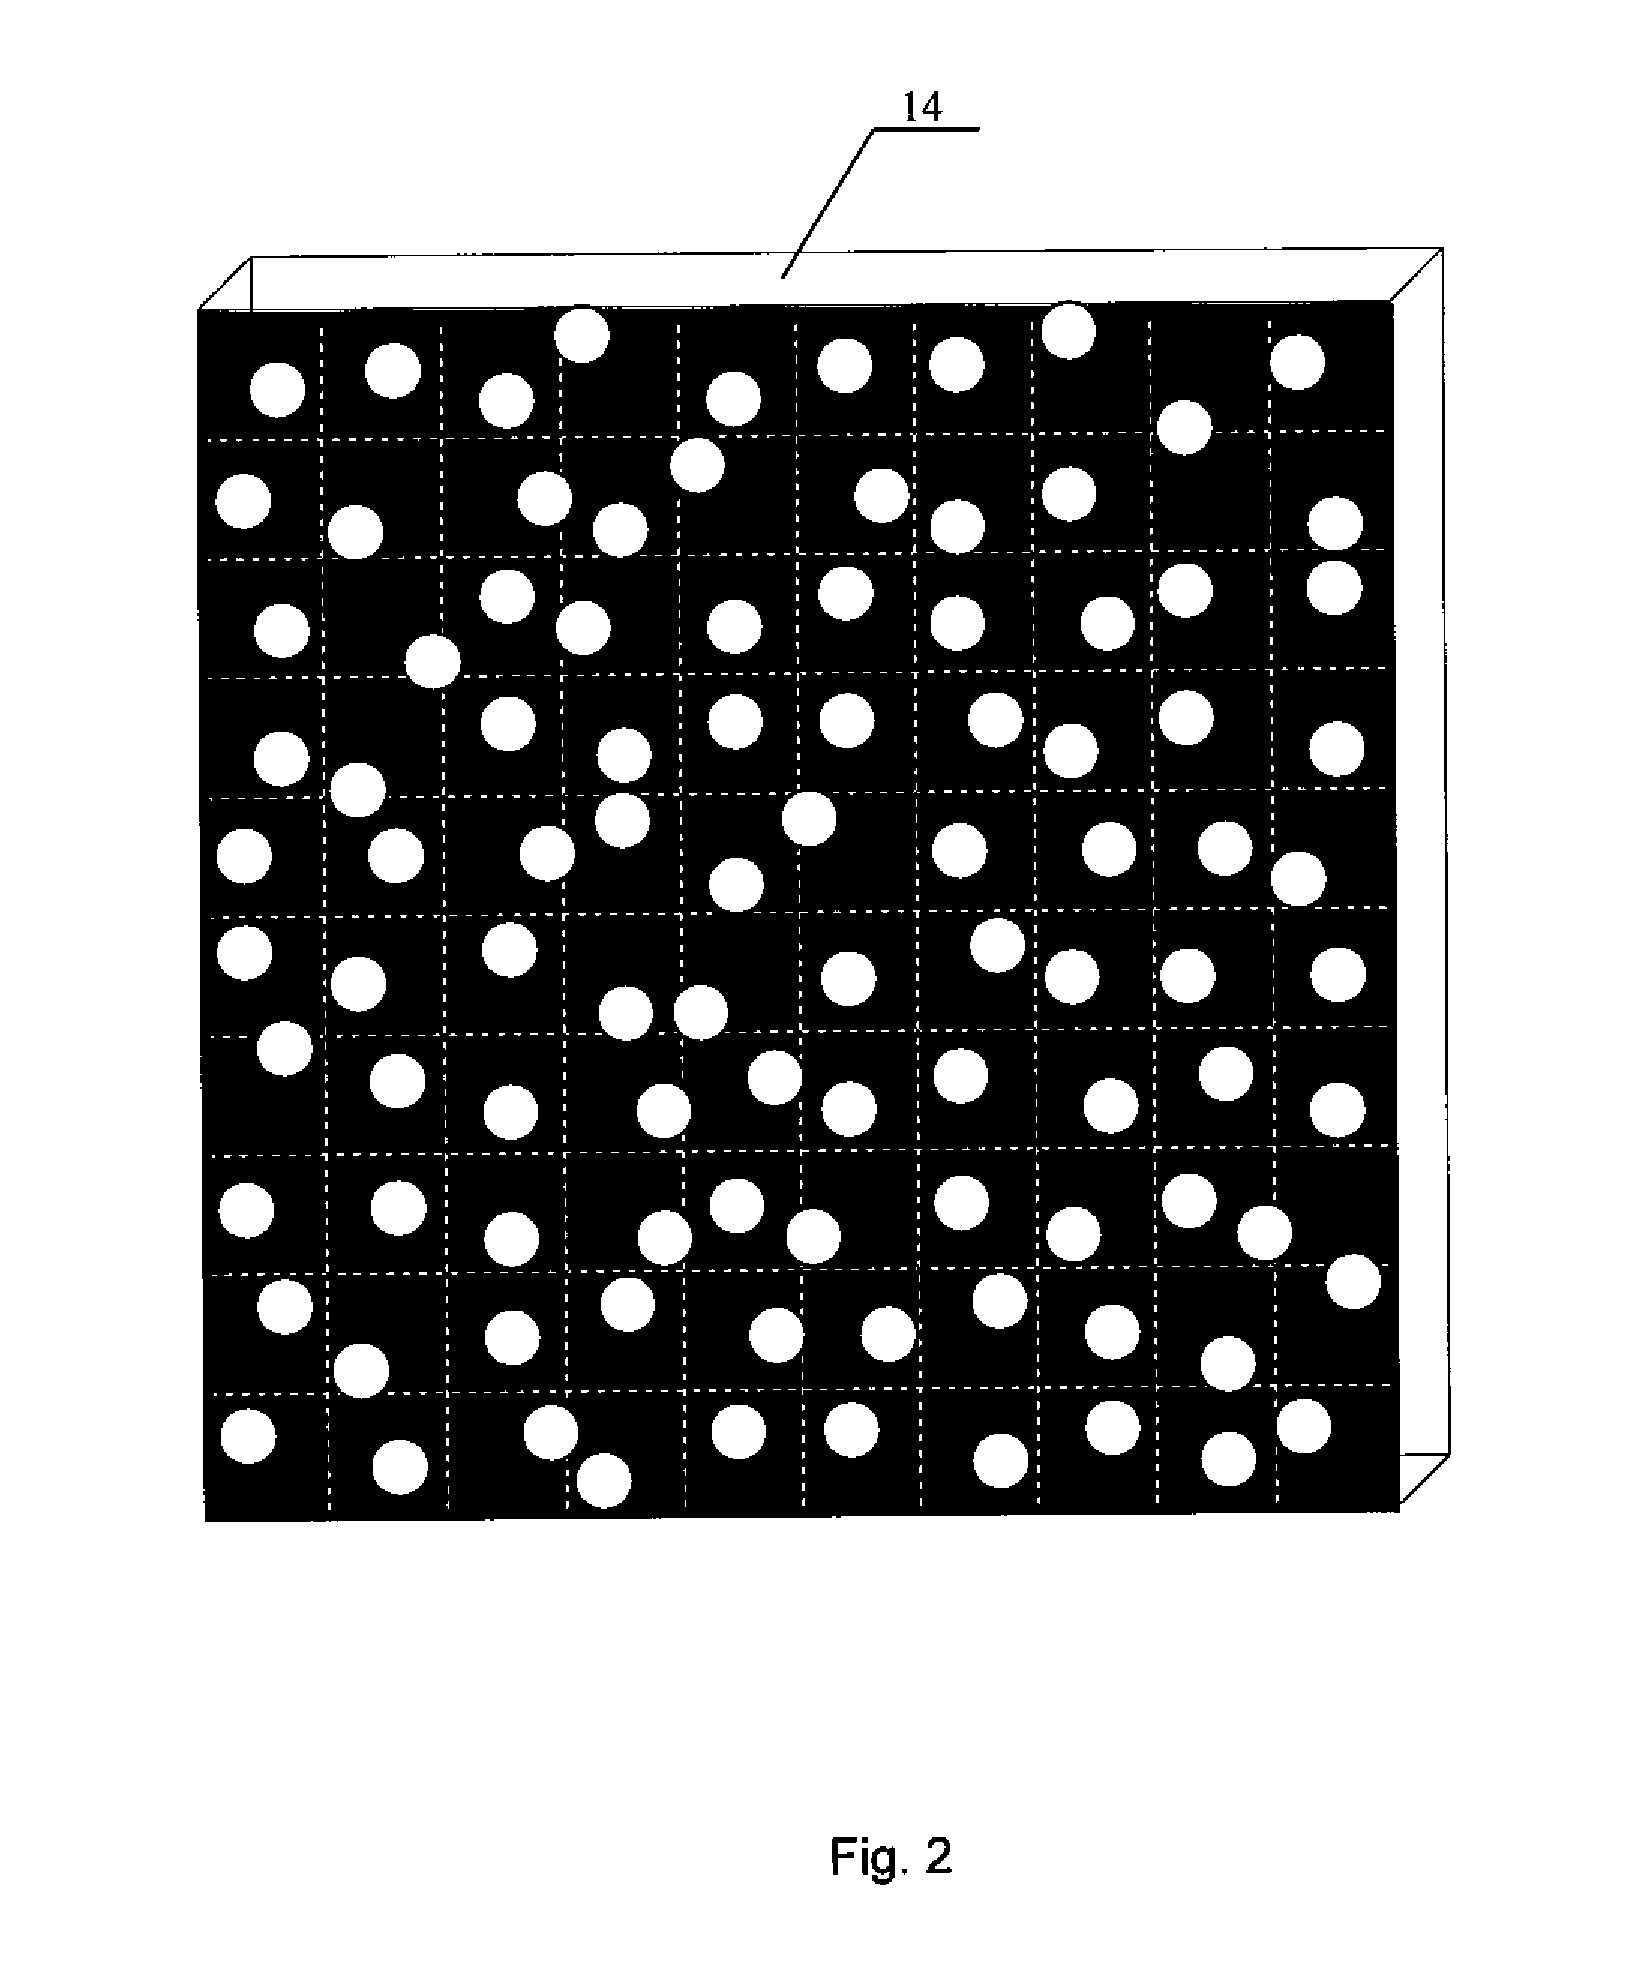 Method and Devices for 3-D Display Based on Random Constructive Interference